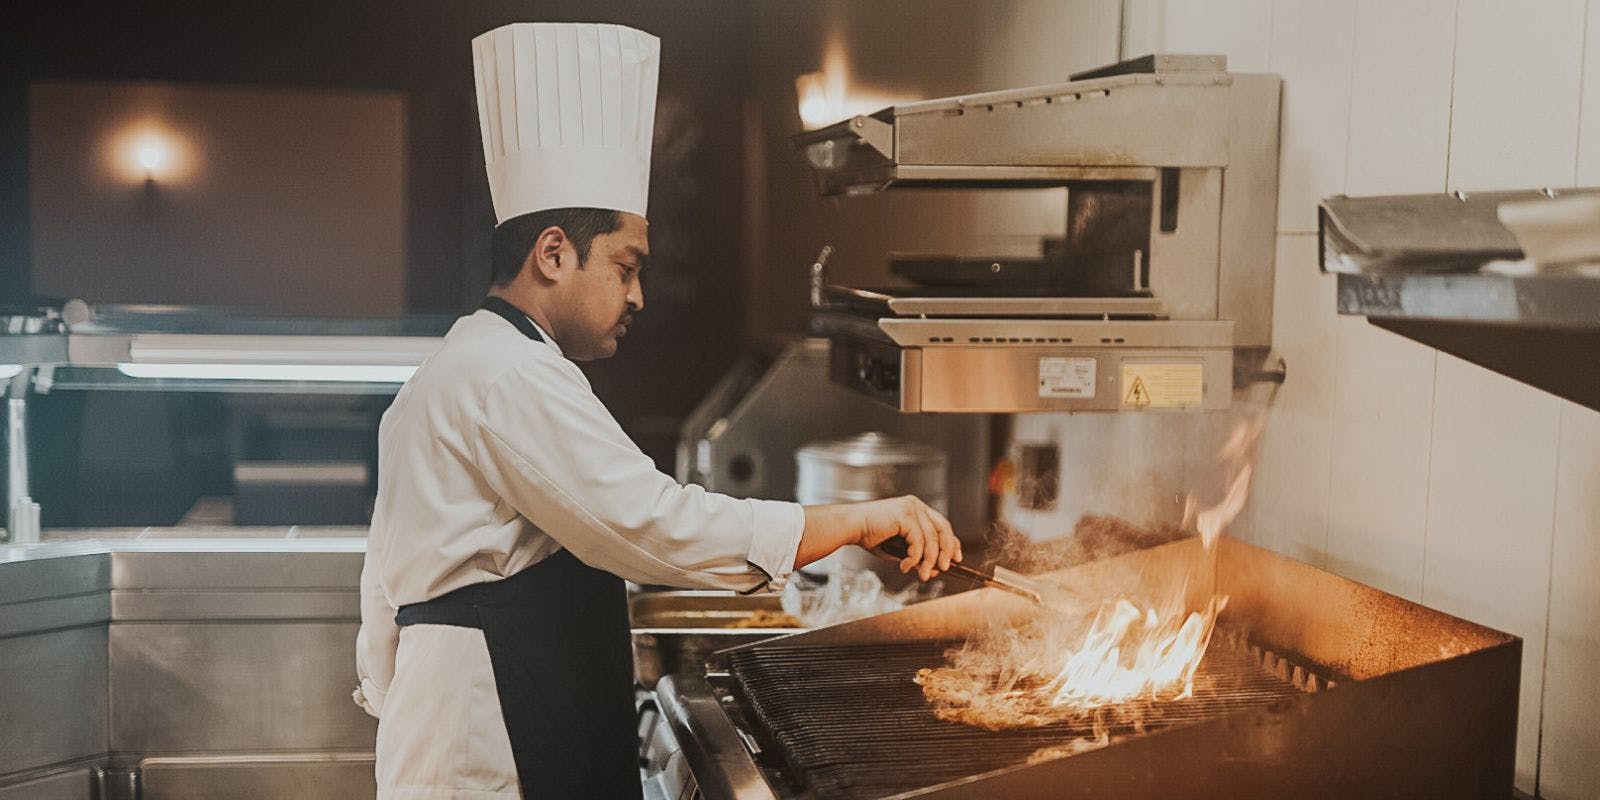 A chef wearing a white uniform and a tall white hat uses tongs to grill food over an open flame in a commercial kitchen.